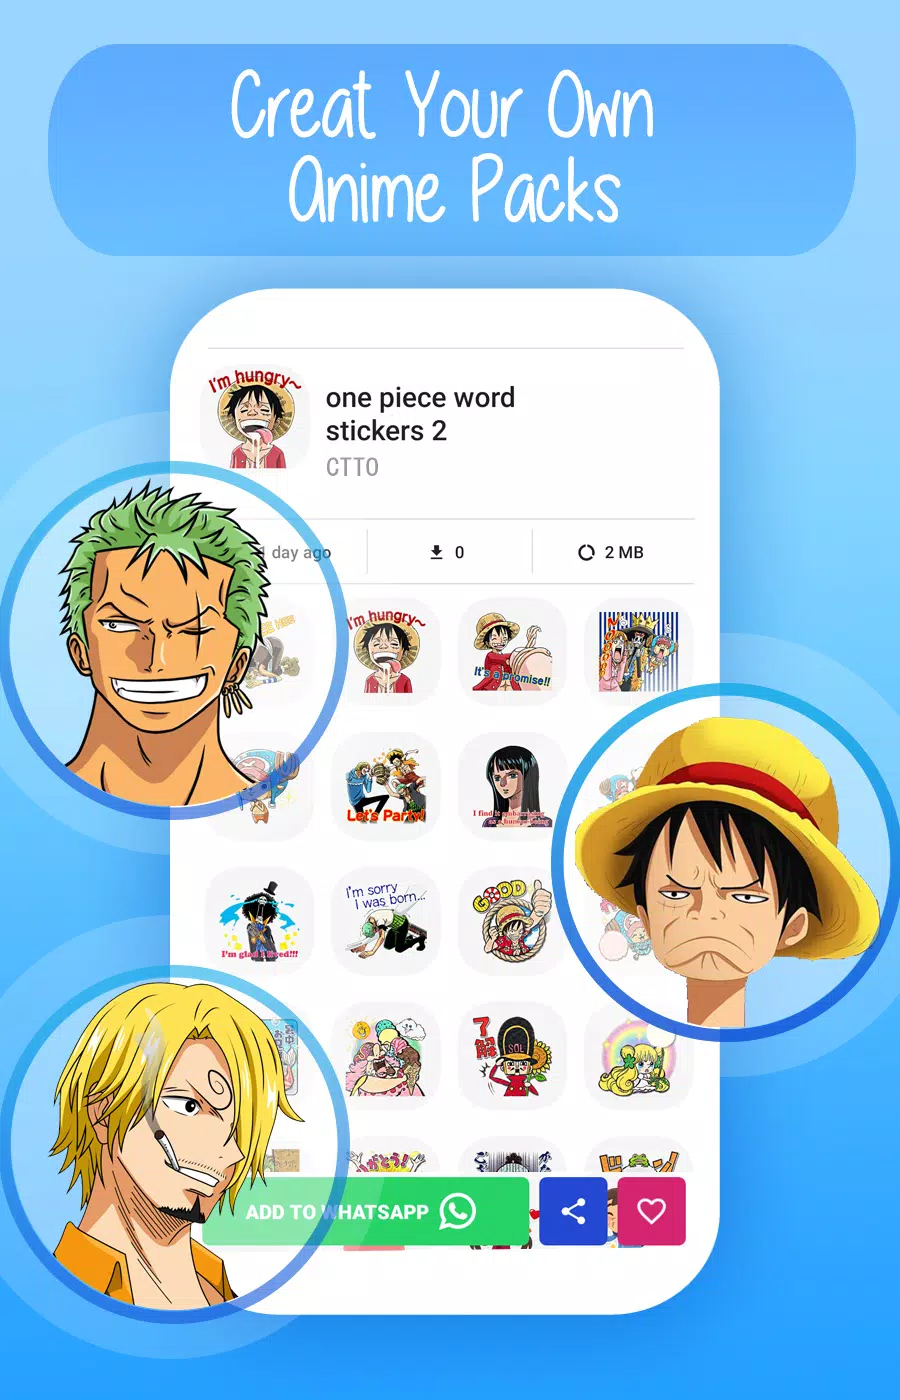 Anime Memes Stickers For WhatsApp 2021 v2.1 [Premium] APK -   - Android & iOS MODs, Mobile Games & Apps